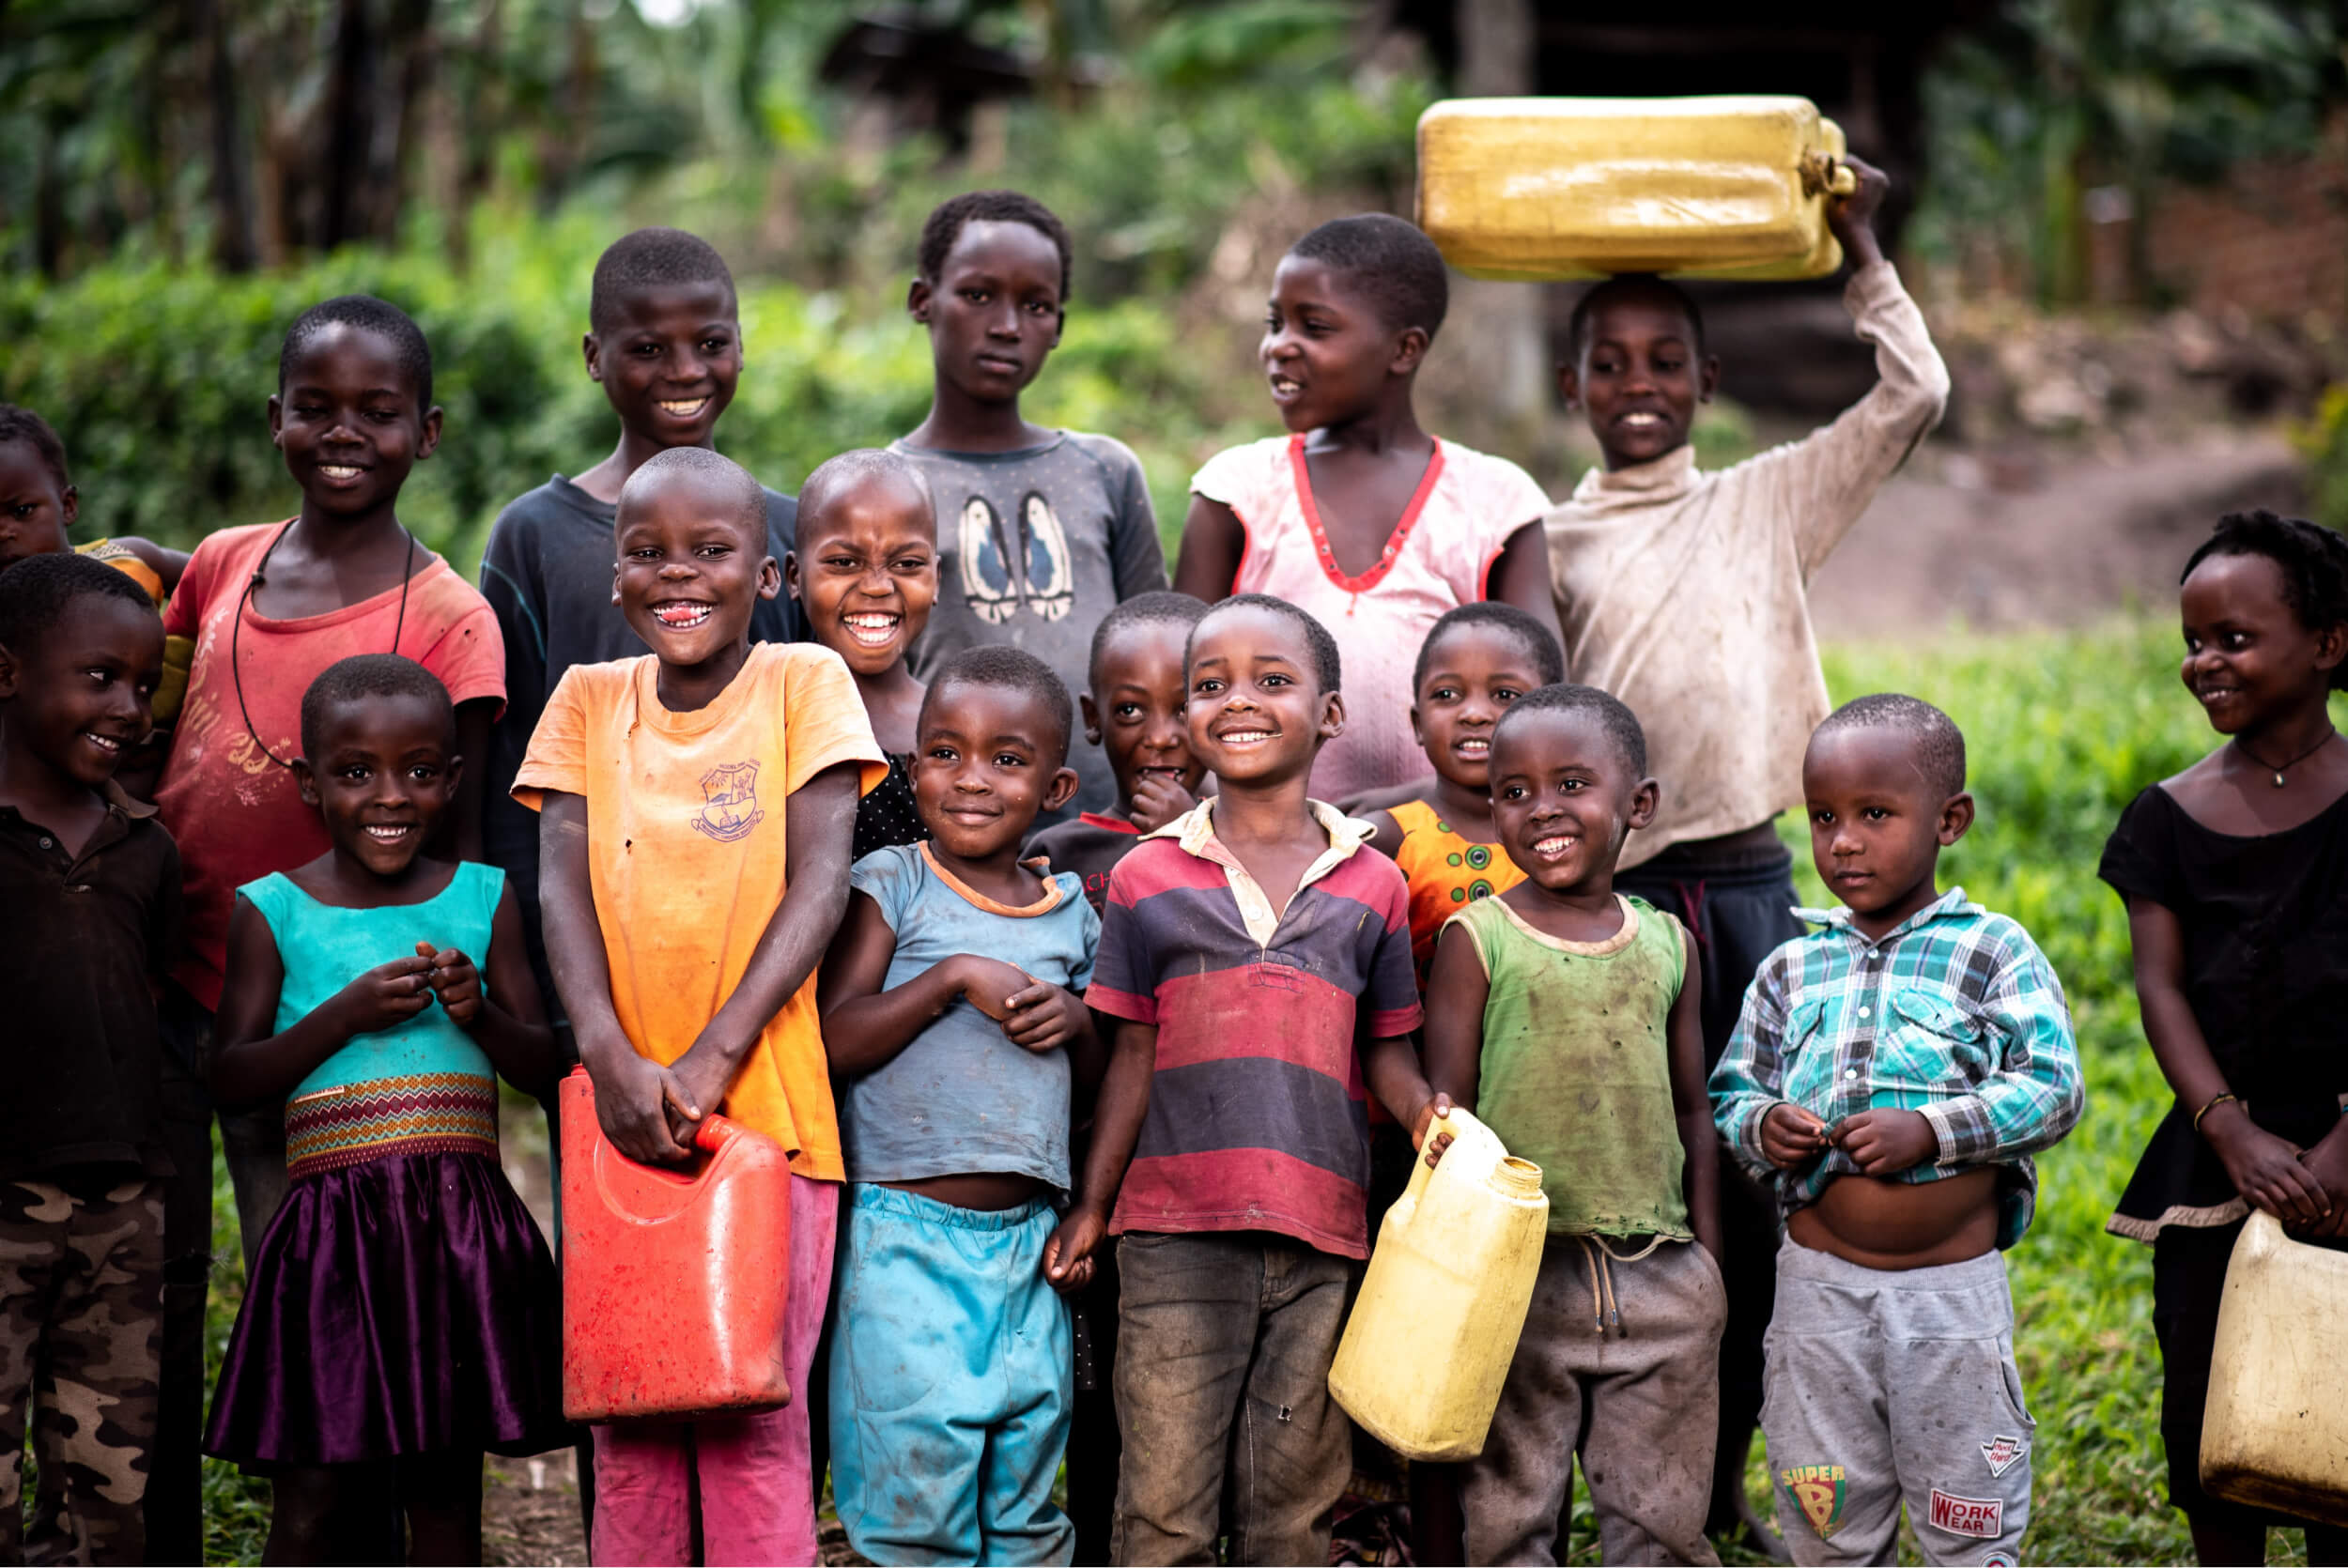 group of kids smiling together, few holding containers